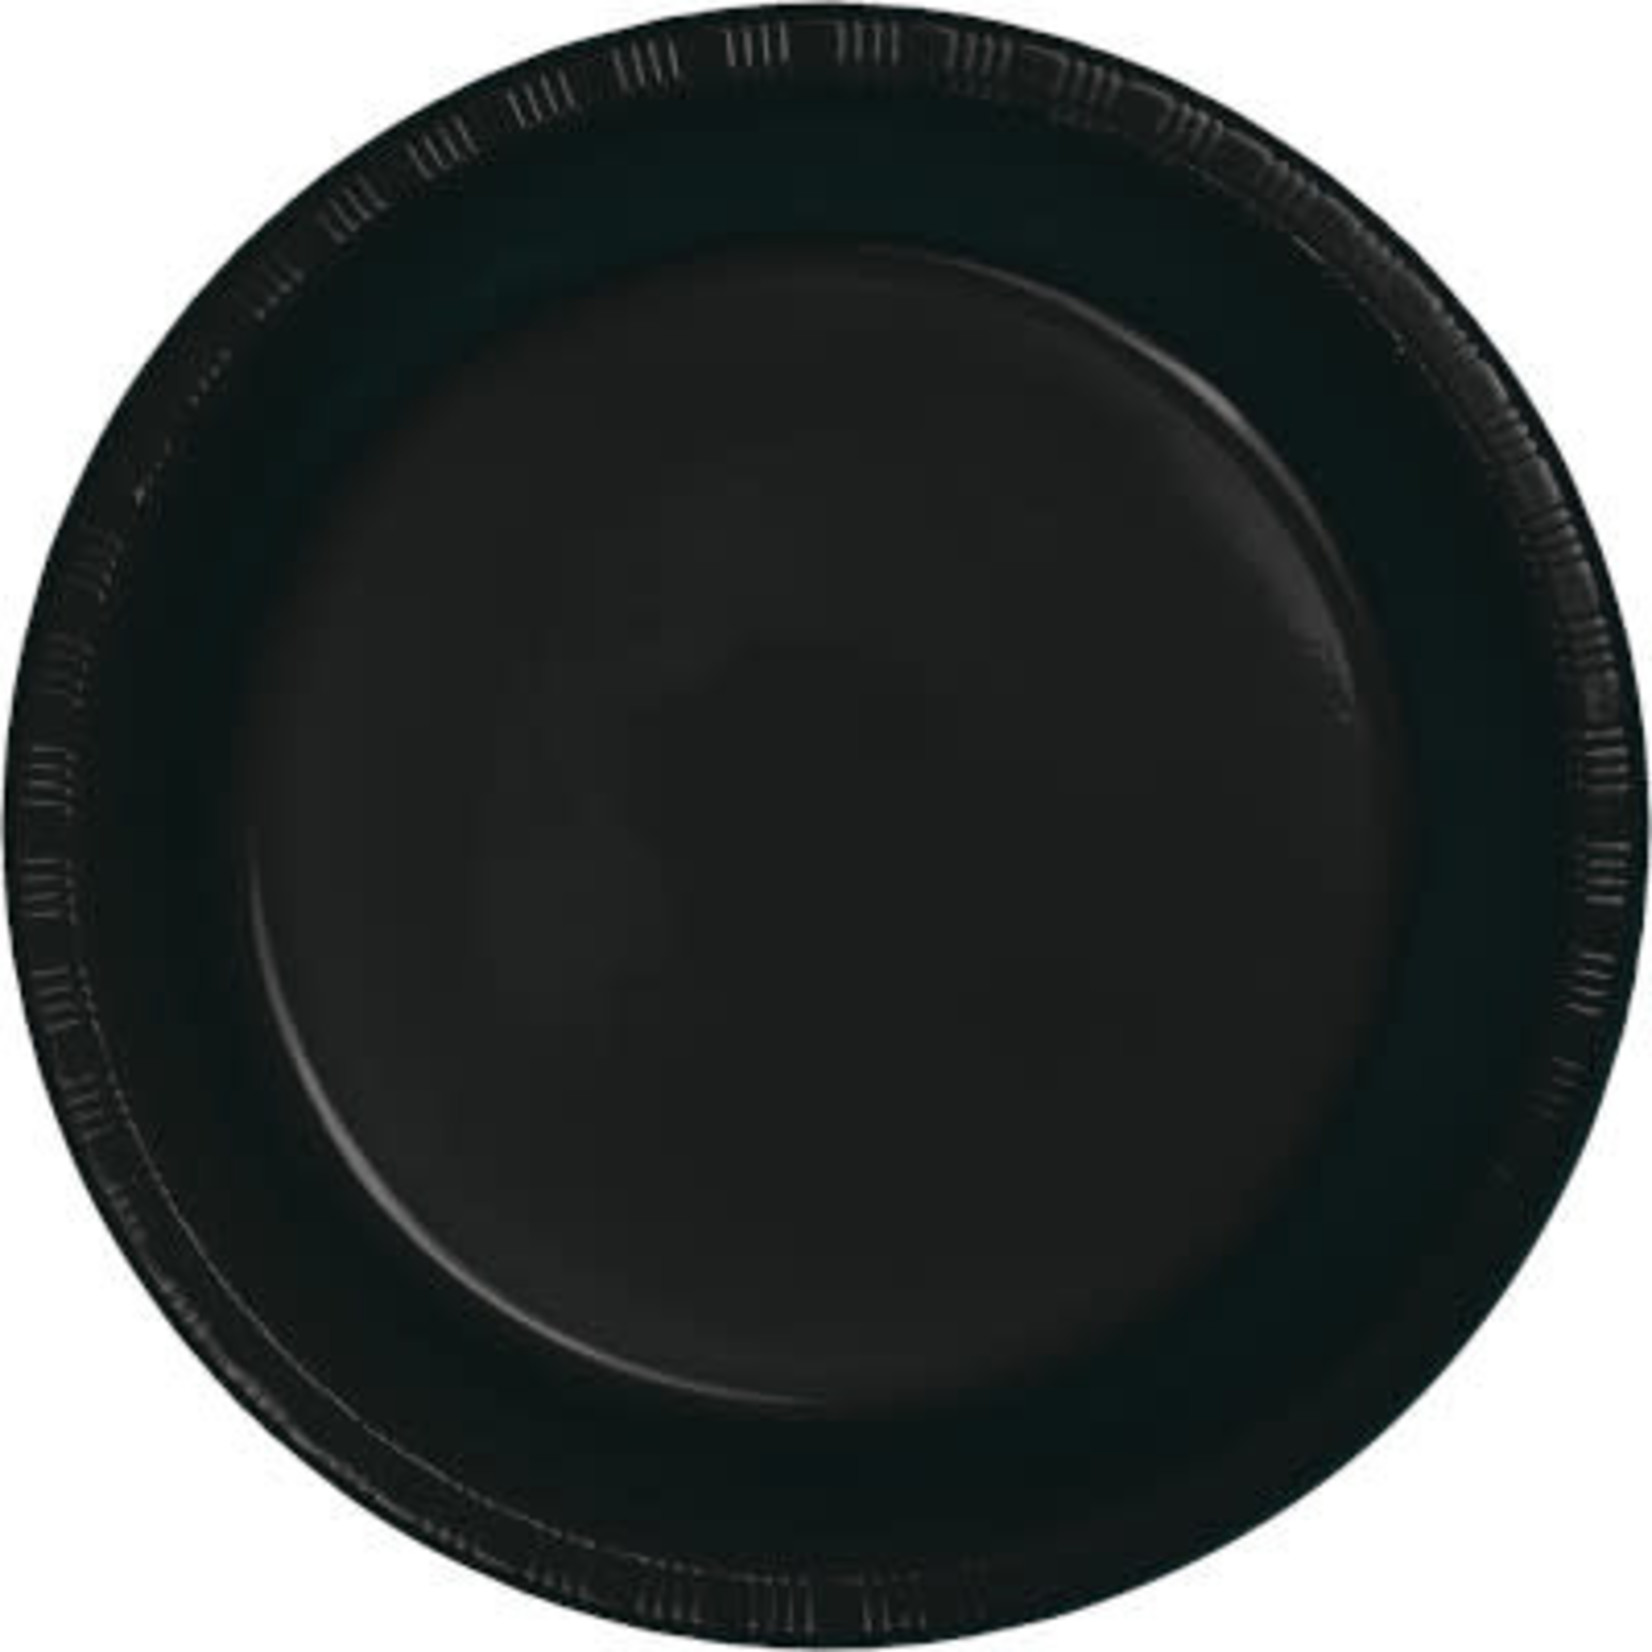 Touch of Color 7" Black Plastic Plates - 20ct.